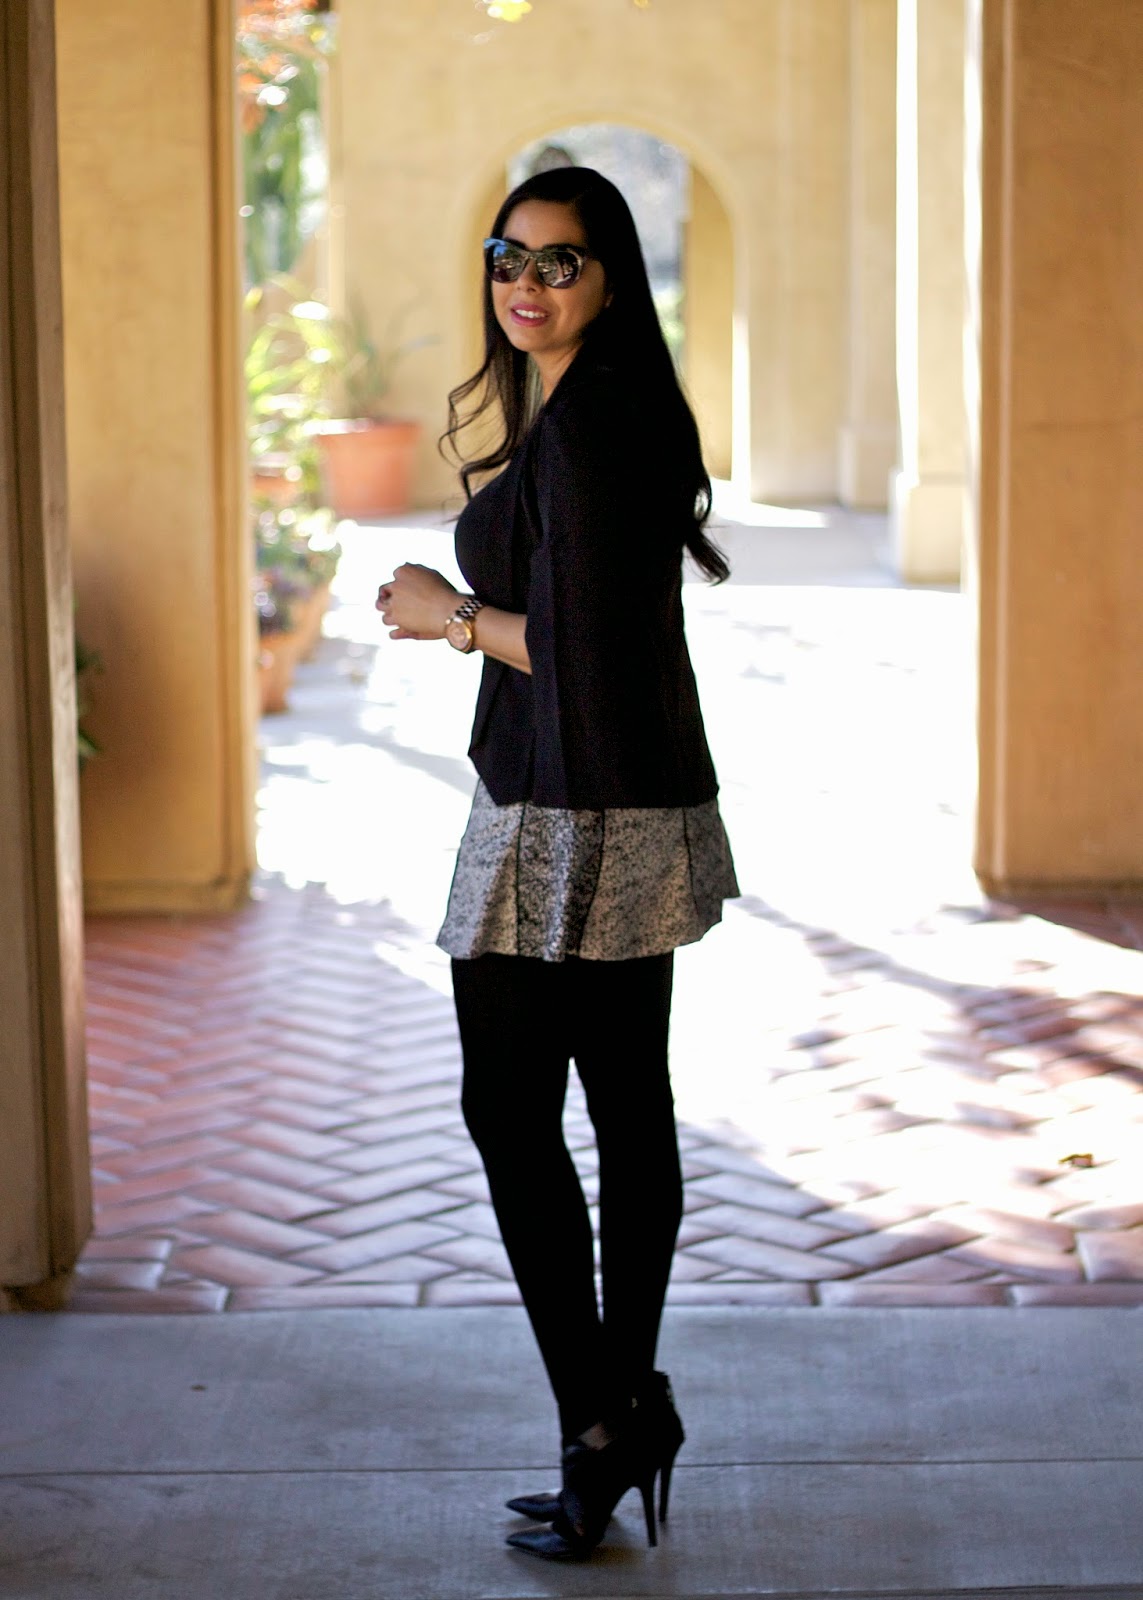 How to wear a chic outfit, chic San Diego, San Diego chic blogger, best of San Diego bloggers